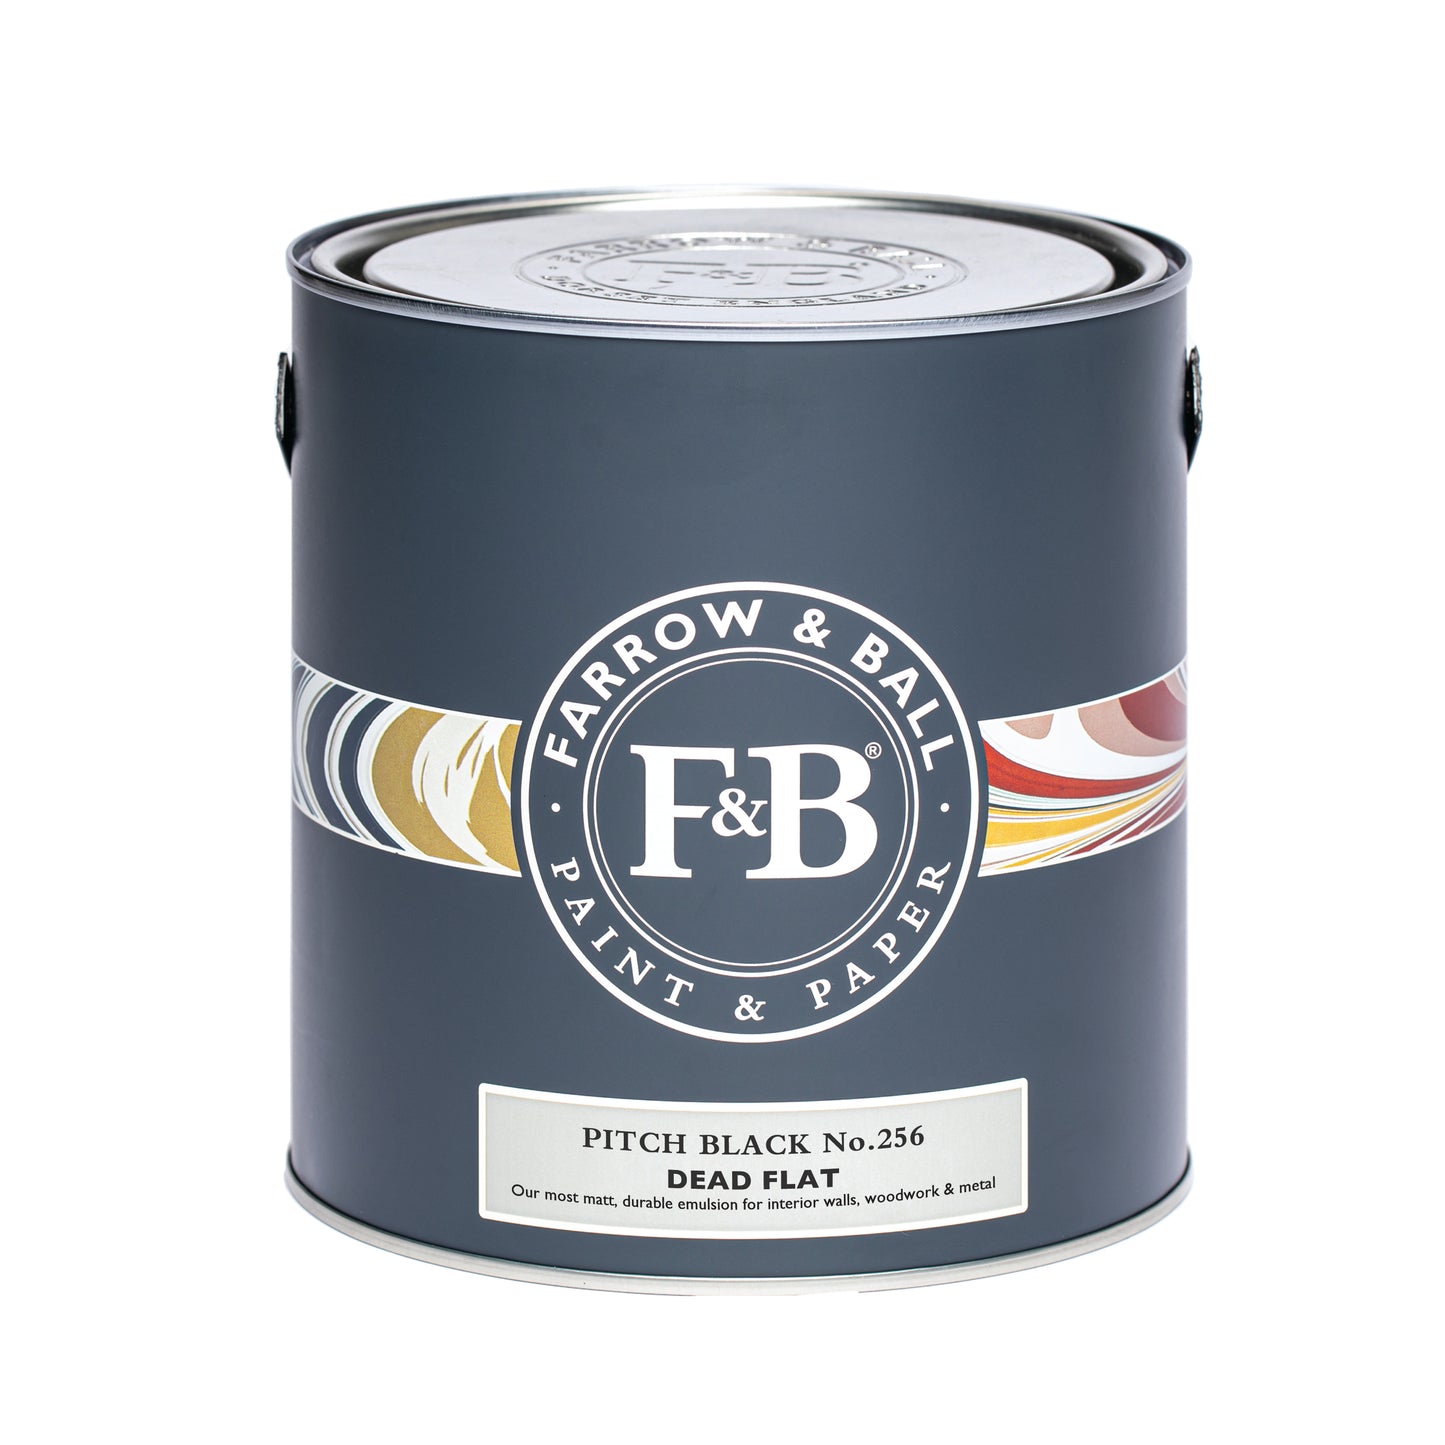 Pitch Black 256 - Farrow and Ball - New Dead Flat